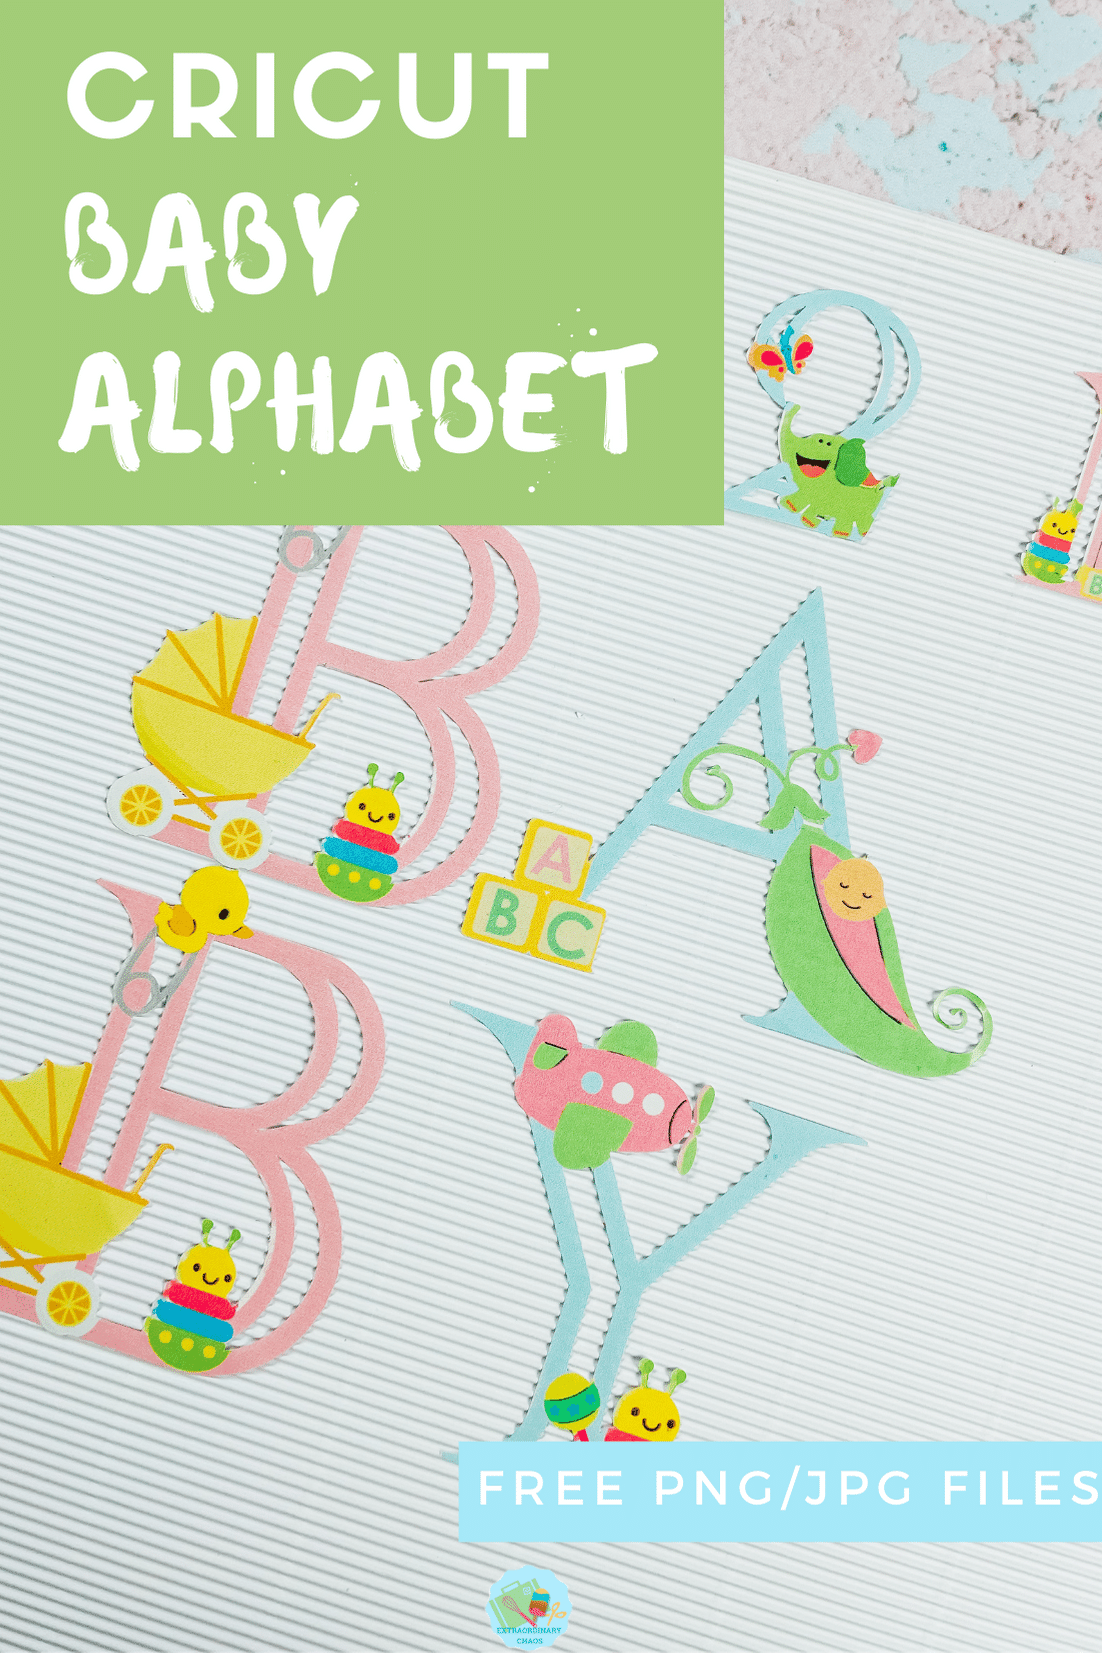 Free downloadable Baby Alphabet for creating baby gifts and decorating nurseries